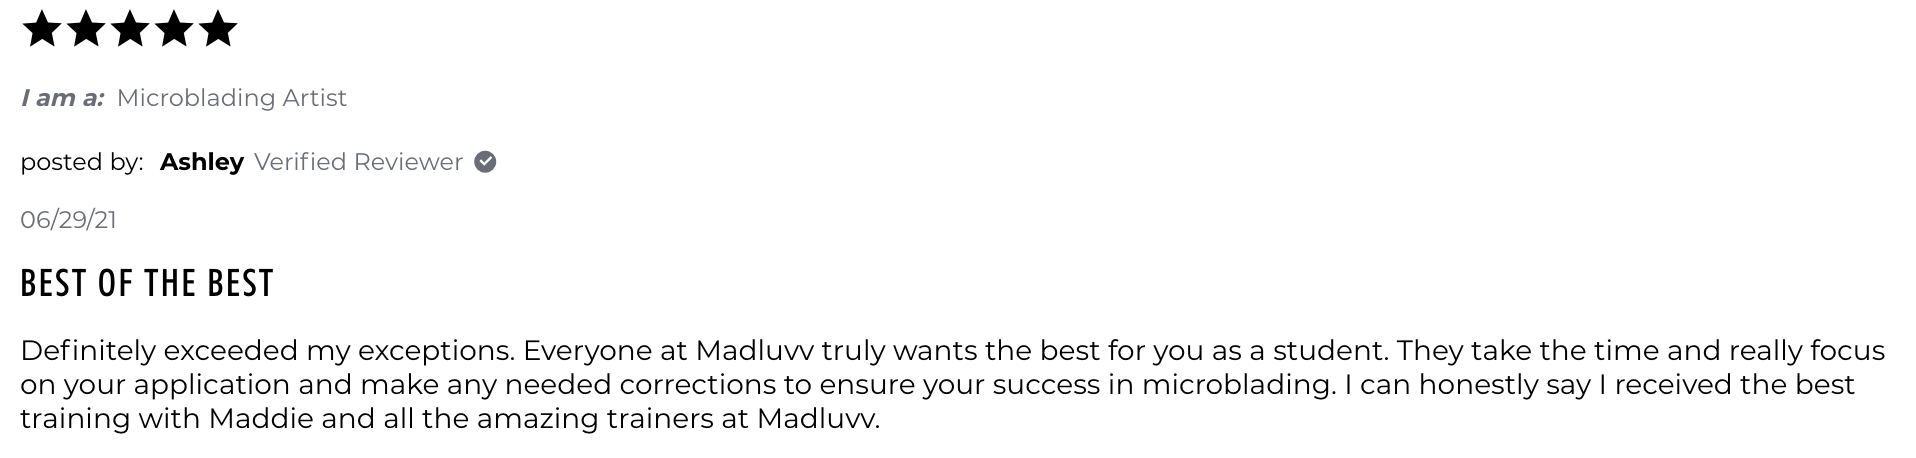 Review Madluvv's Microblading Training Course